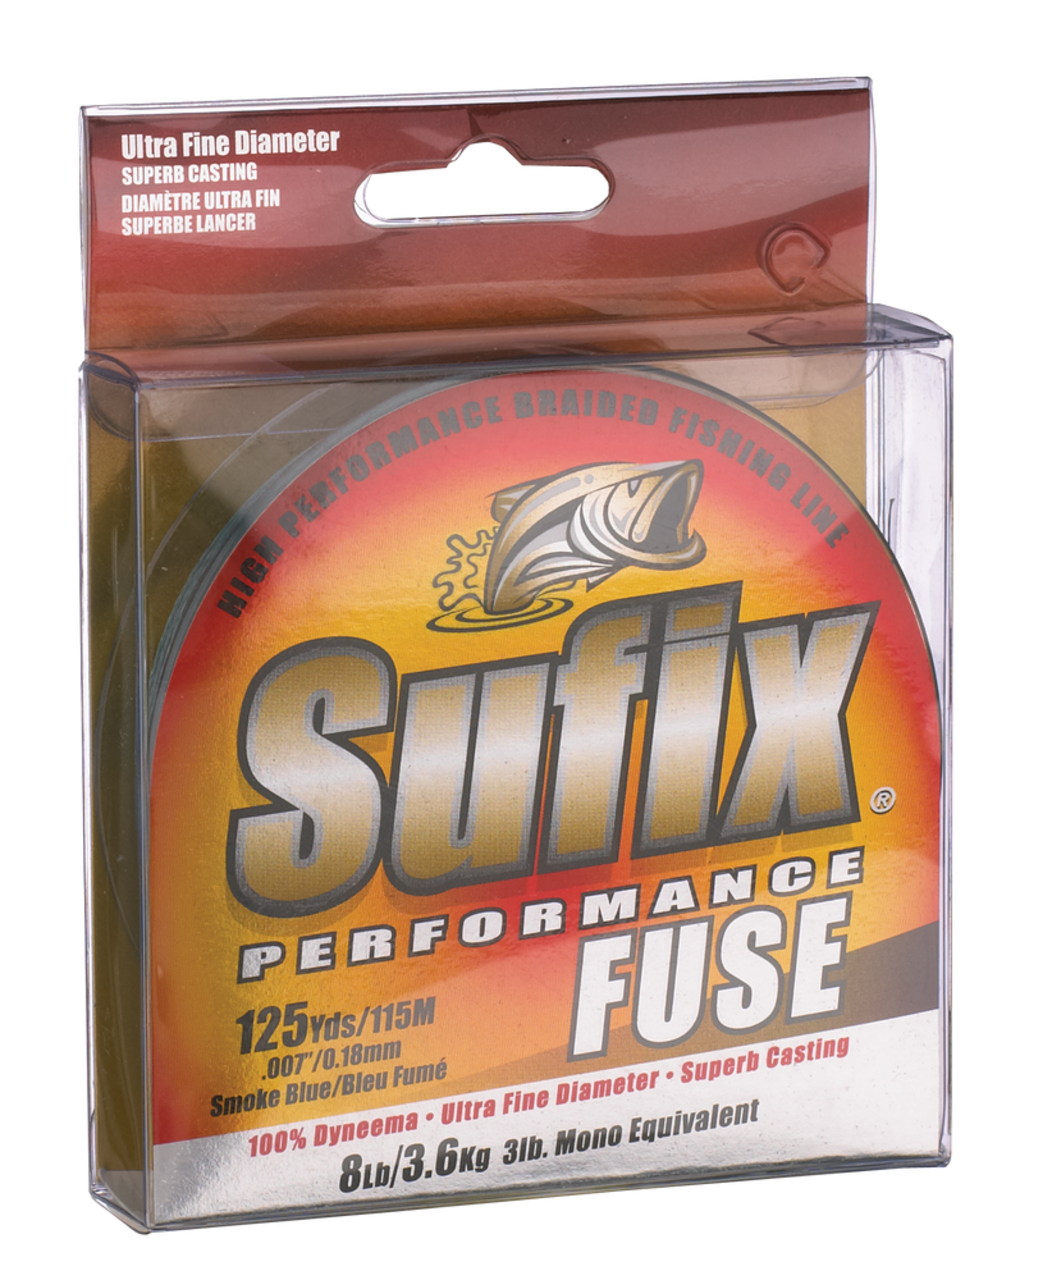 https://media-www.canadiantire.ca/product/playing/fishing/fishing-accessories/0773086/sufix-performance-fuse-8-lb-smoke-blue-125-yd-5e1b3e6a-2de3-4618-ae9f-c203e0b8fac6.png?imdensity=1&imwidth=1244&impolicy=mZoom